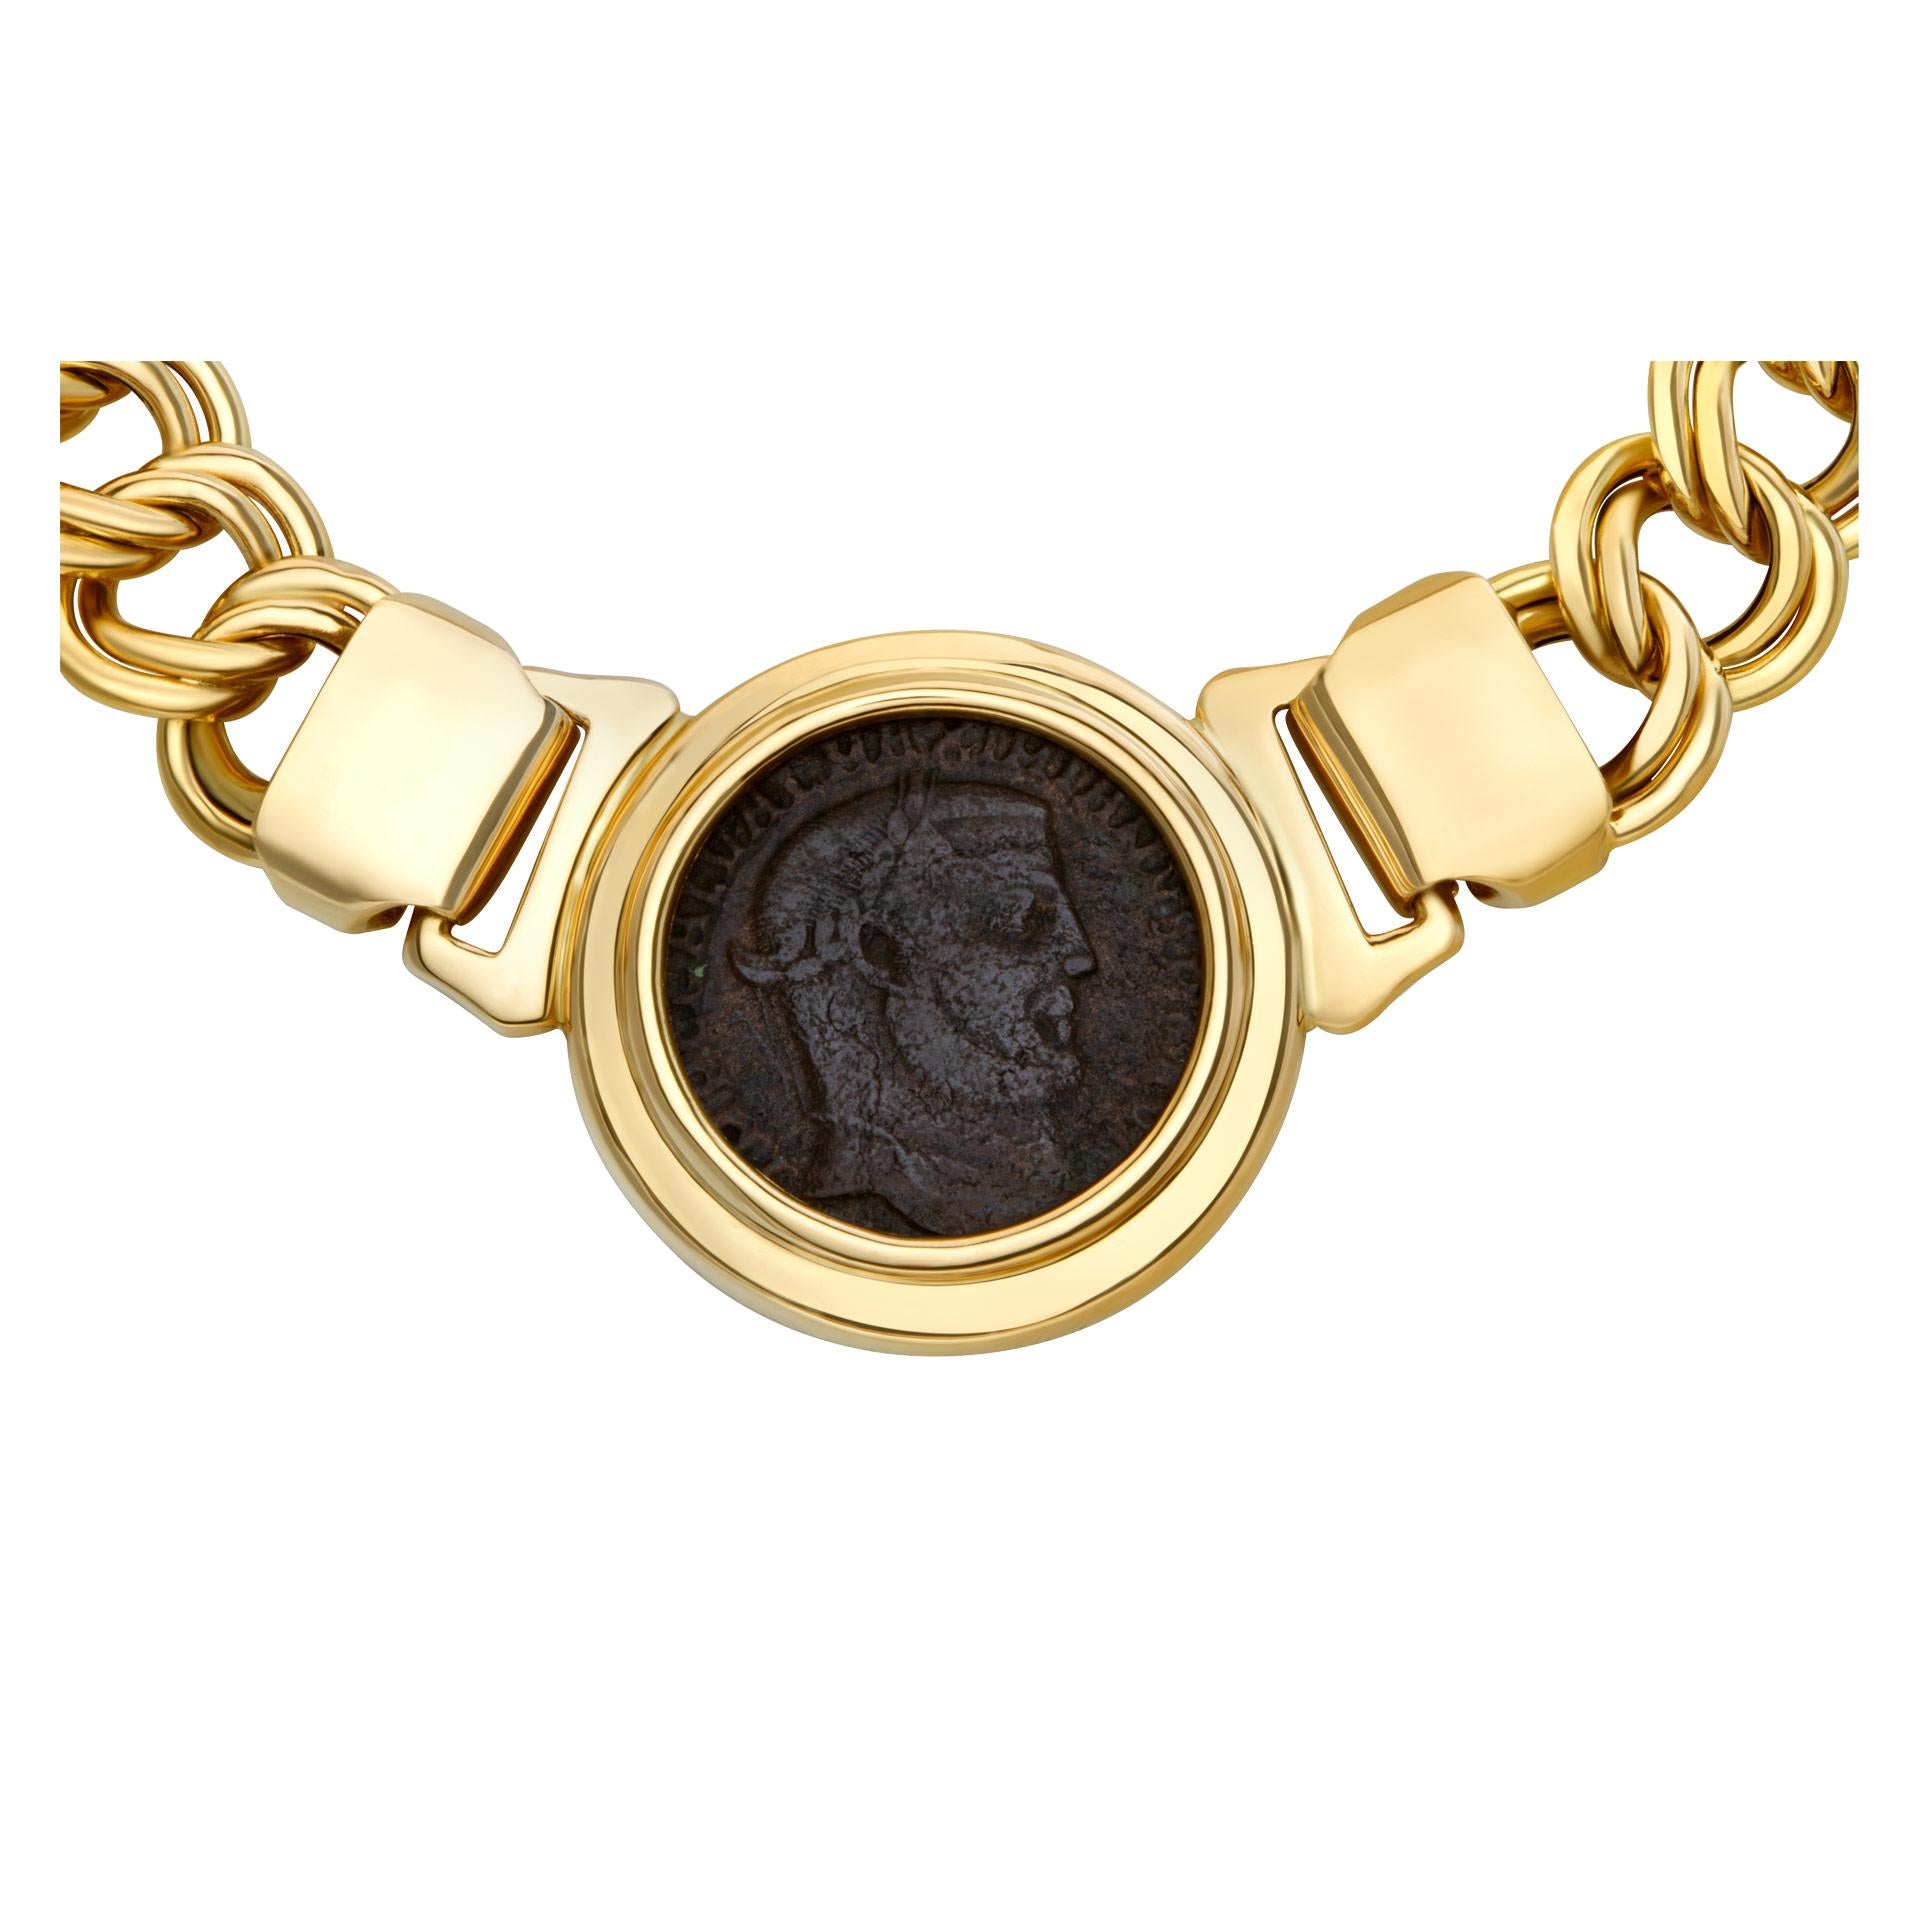 ESTIMATED RETAIL $5,640.00 - YOUR PRICE $4,680.00 - Ancient coin pendant necklace on 18k chain. 16